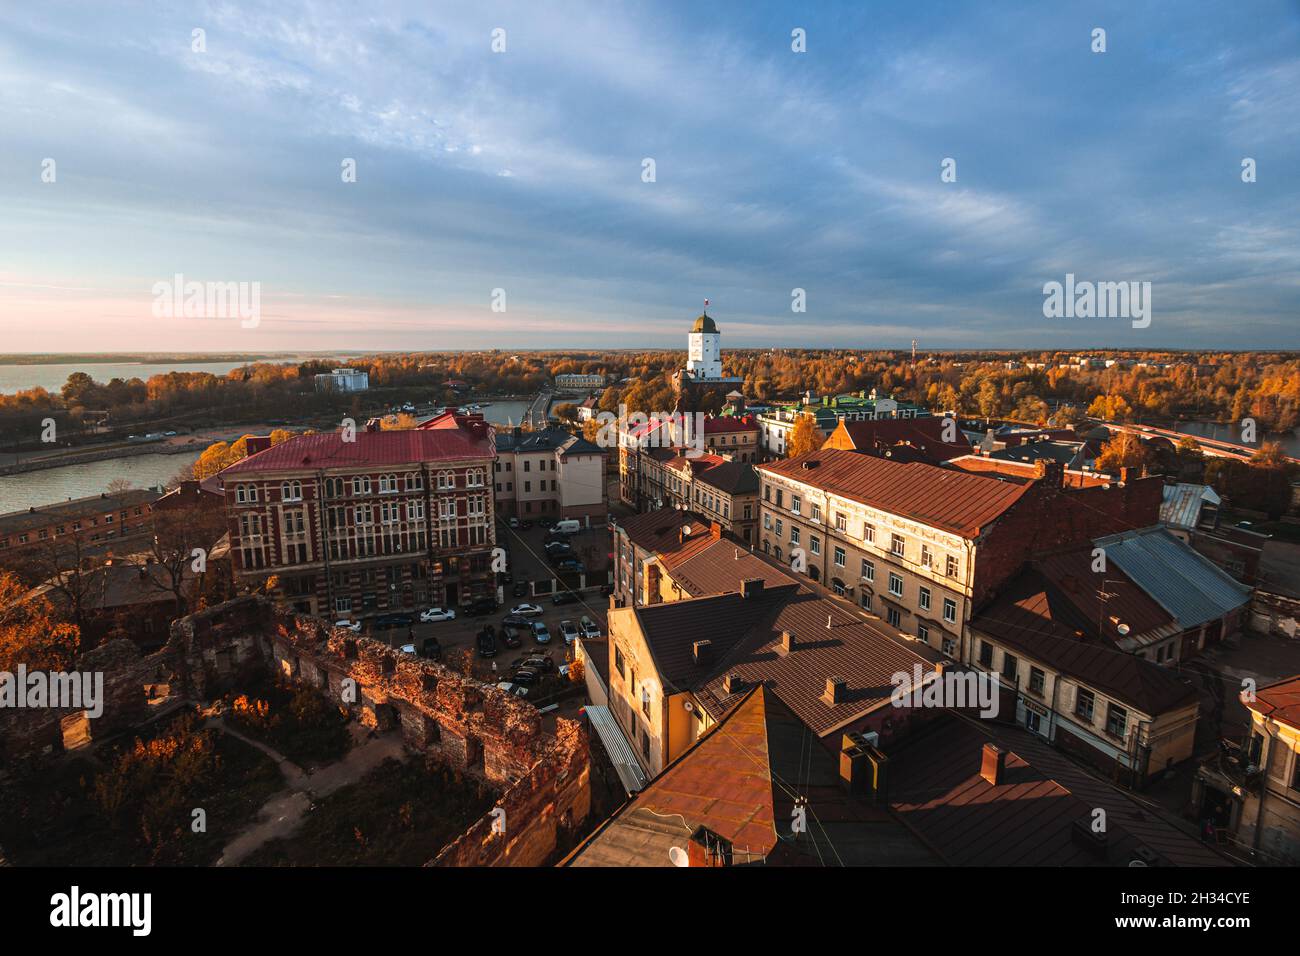 Aeral view of the Tower of St. Olaf and ruined Old cathedral in Vyborg from the Clock Tower in autumn Stock Photo